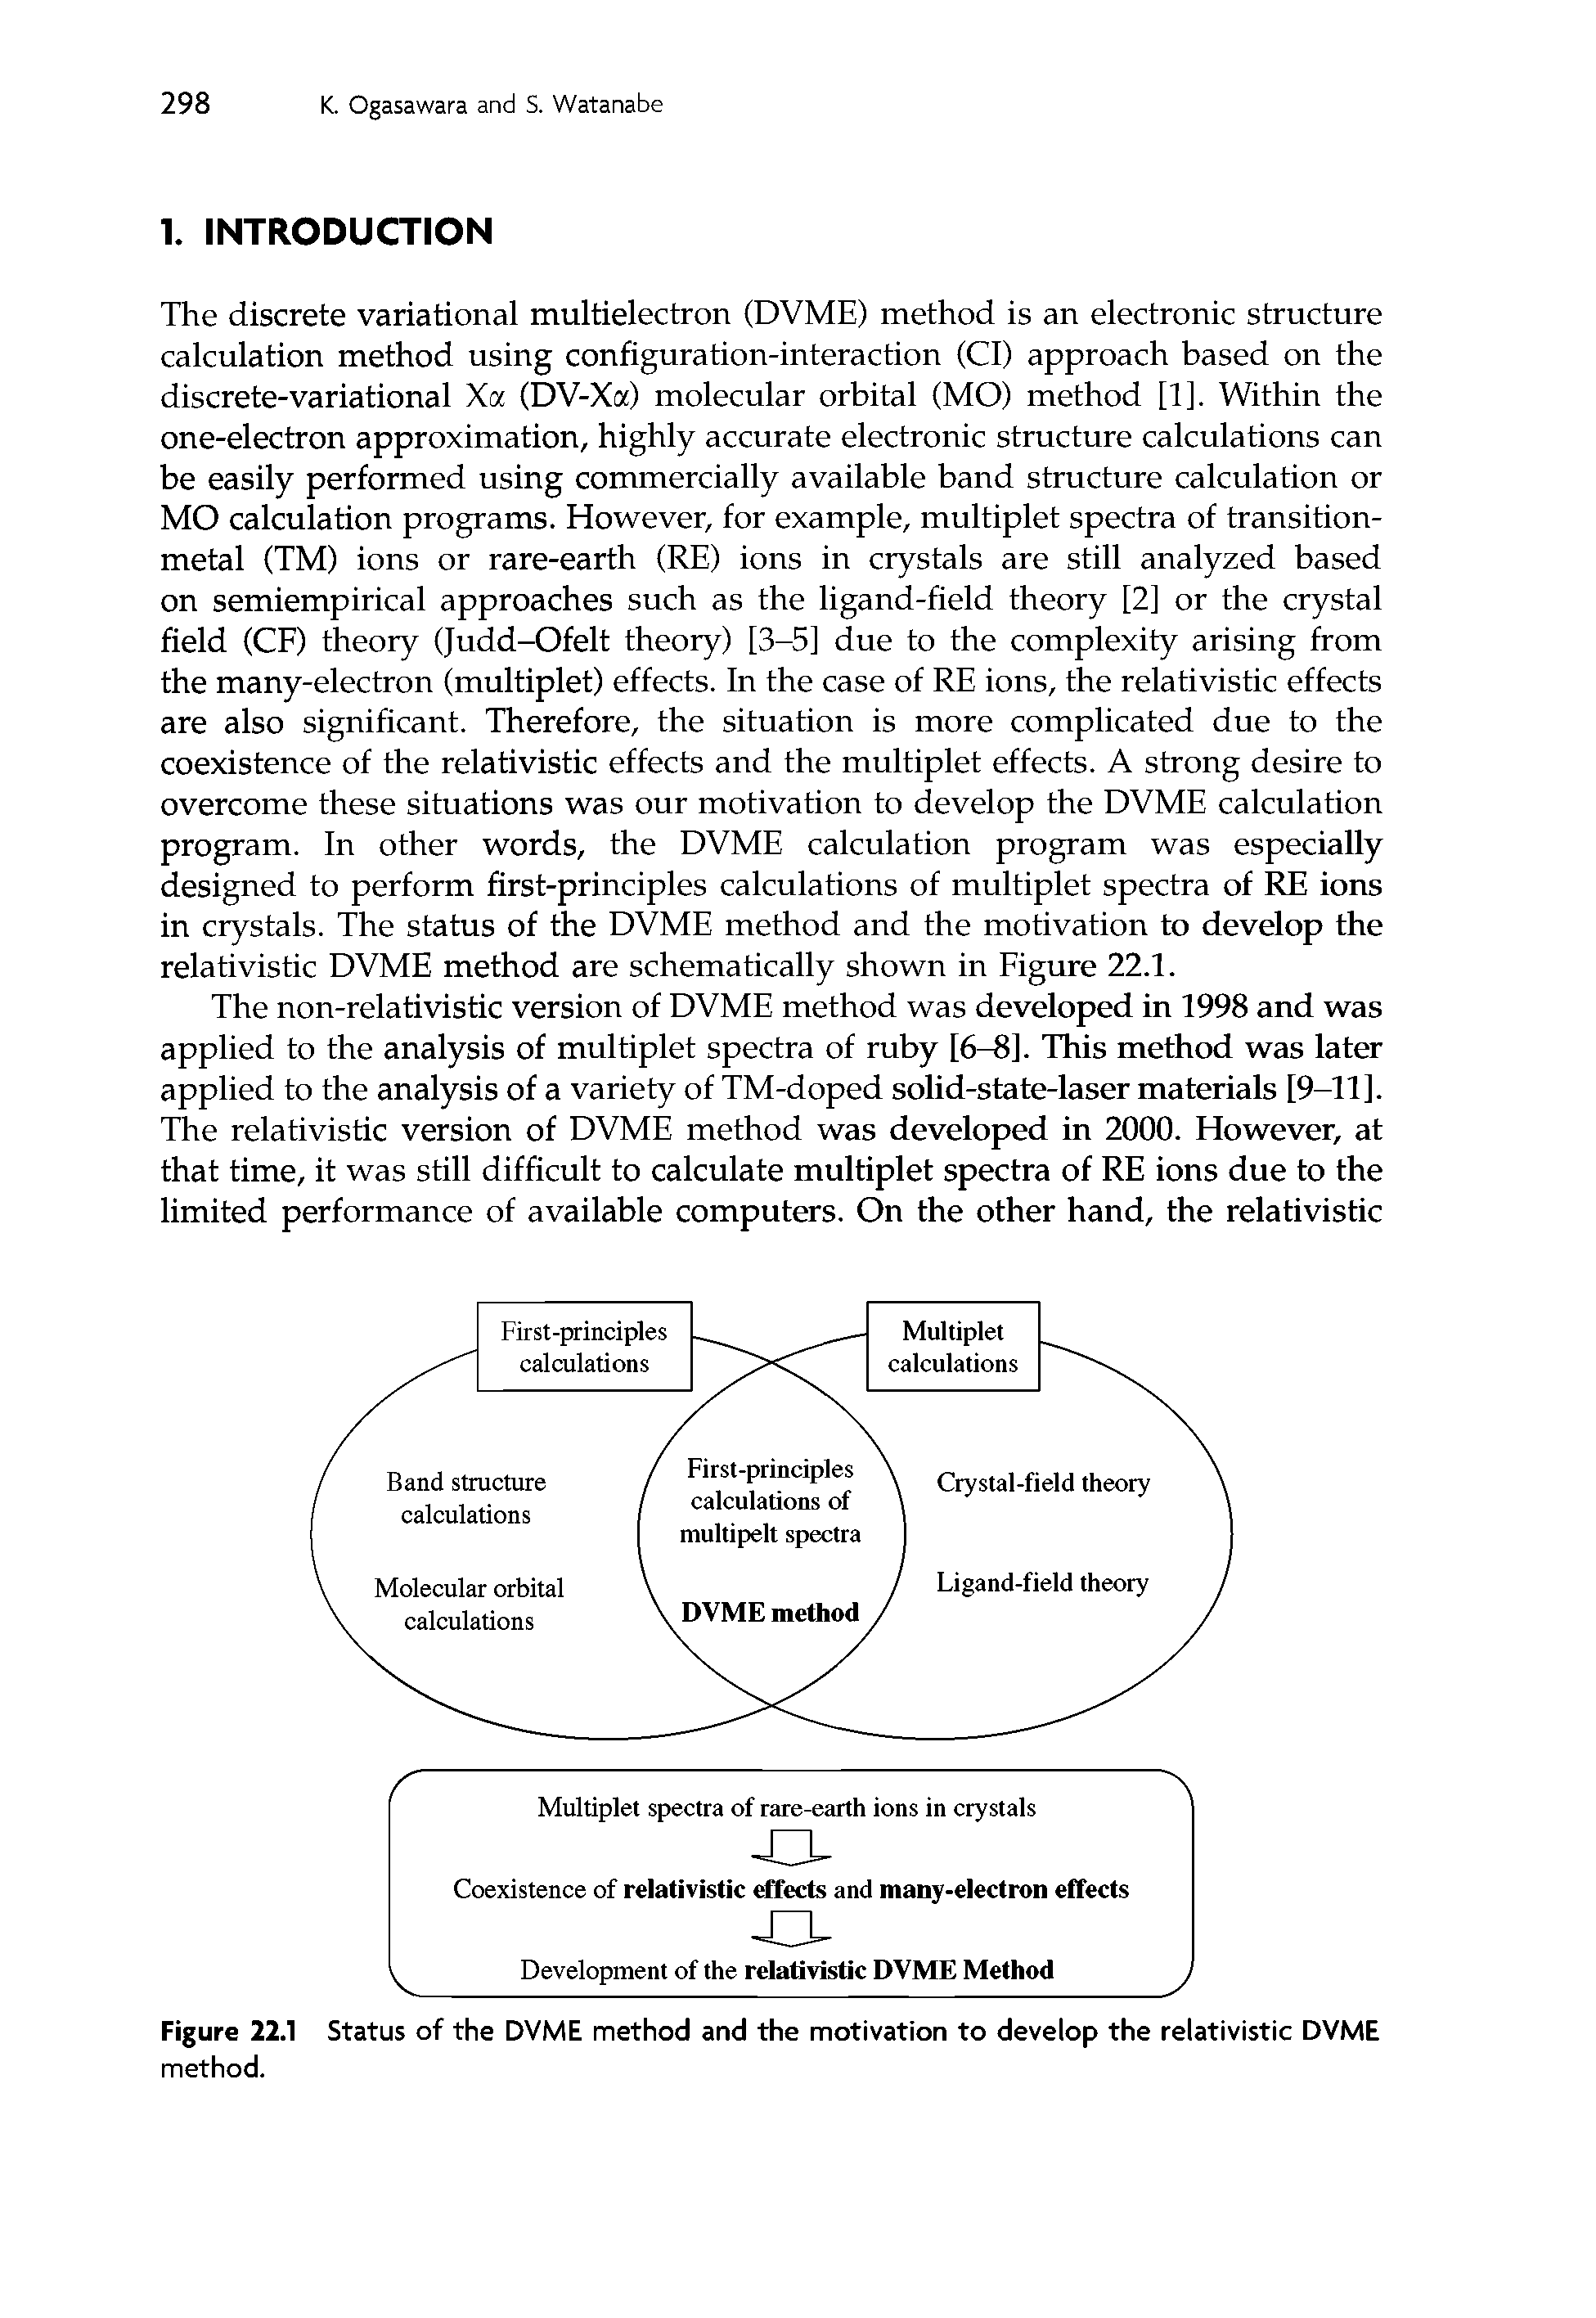 Figure 22.1 Status of the DVME method and the motivation to develop the relativistic DVME method.